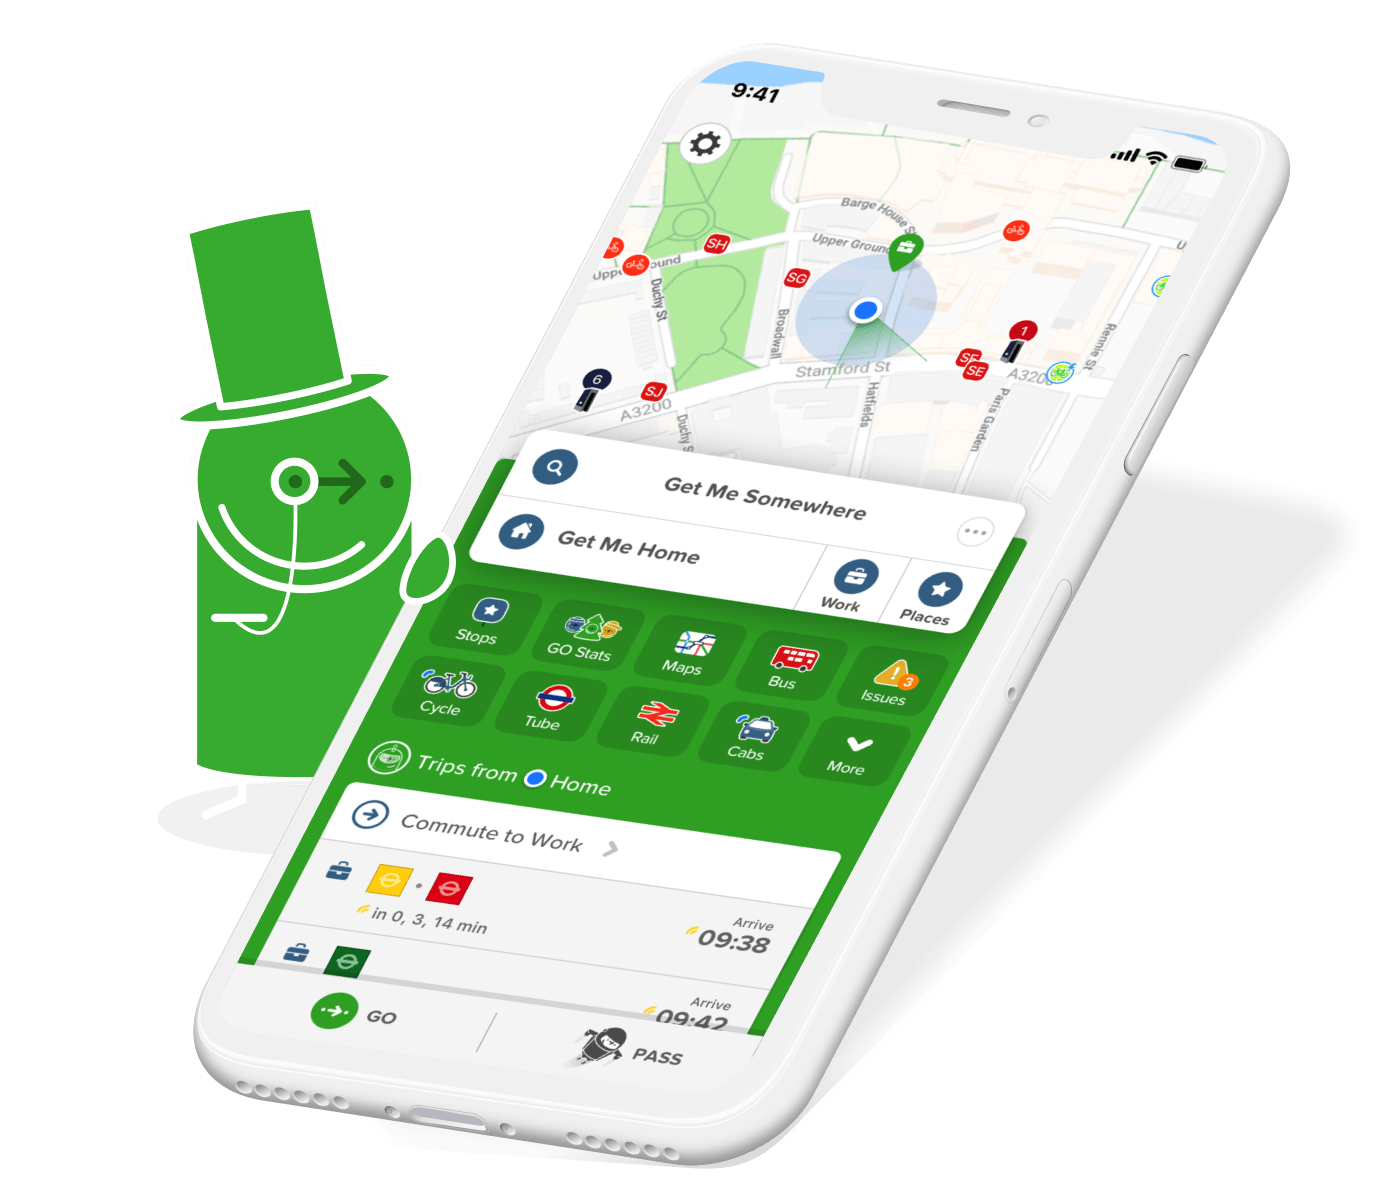 The Citymapper app home screen is presented on an iPhone